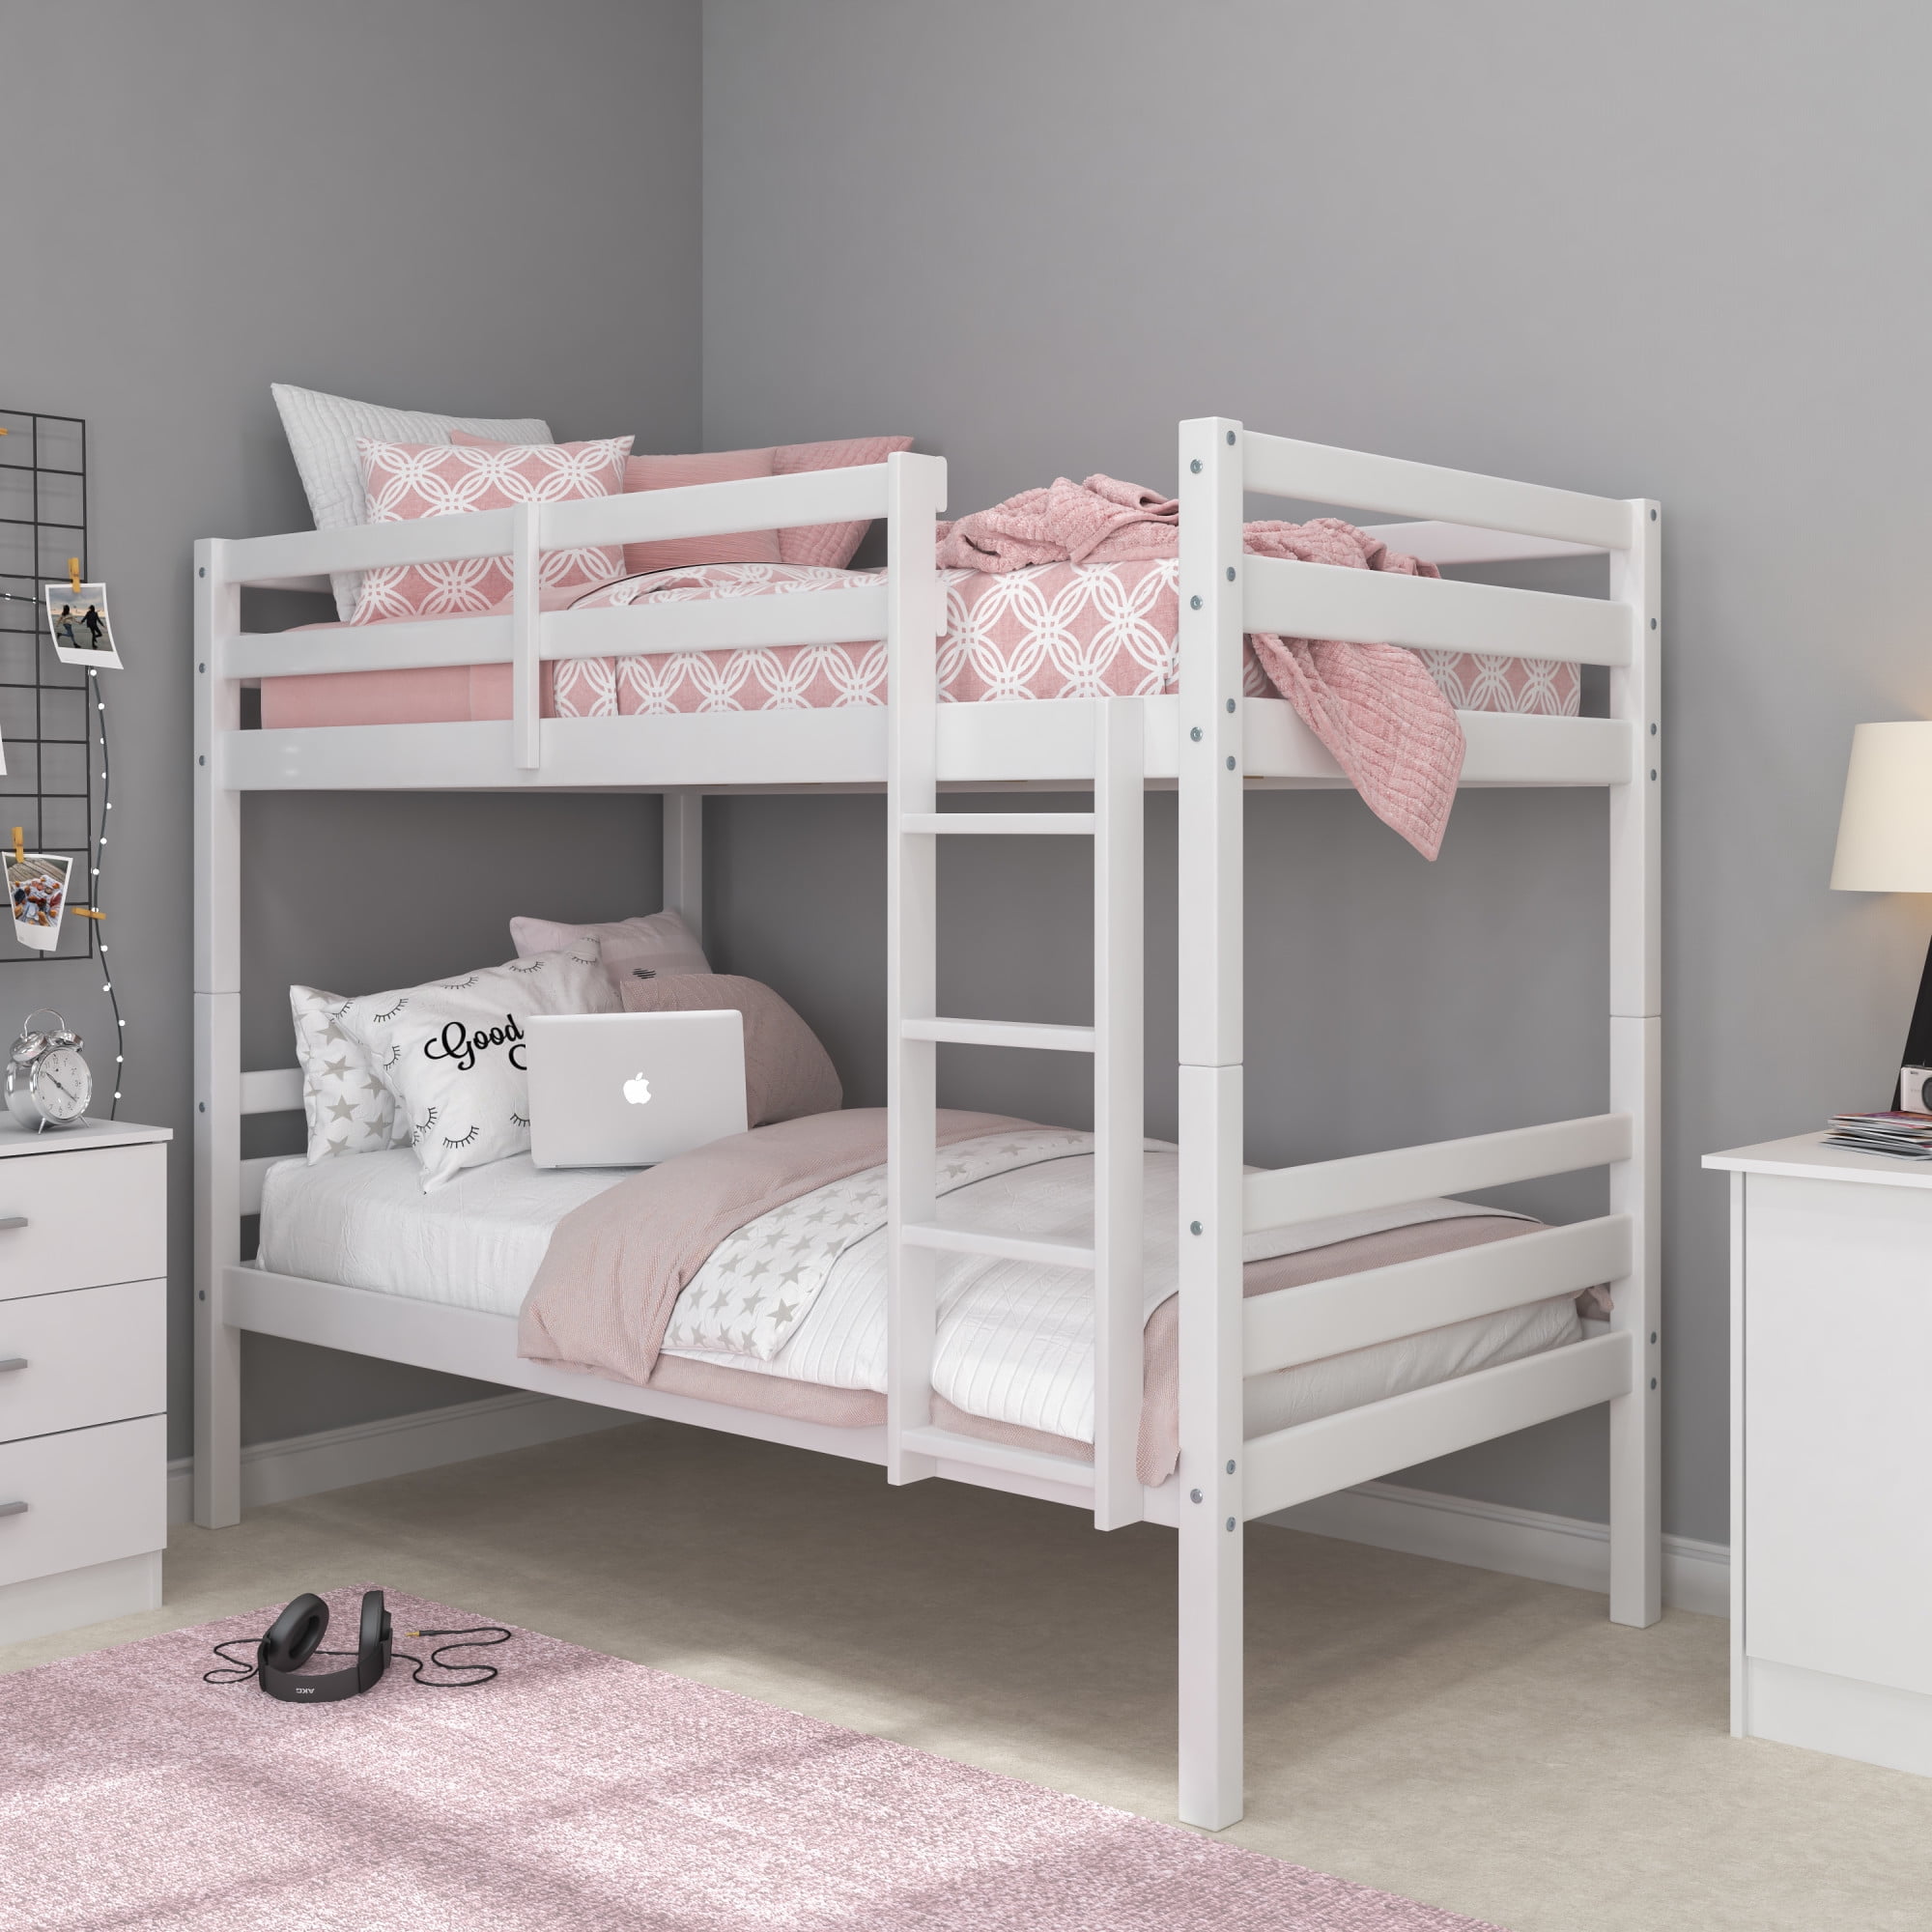 Campbell Wood Twin Over Bunk Bed, Abby Twin Over Bunk Bed